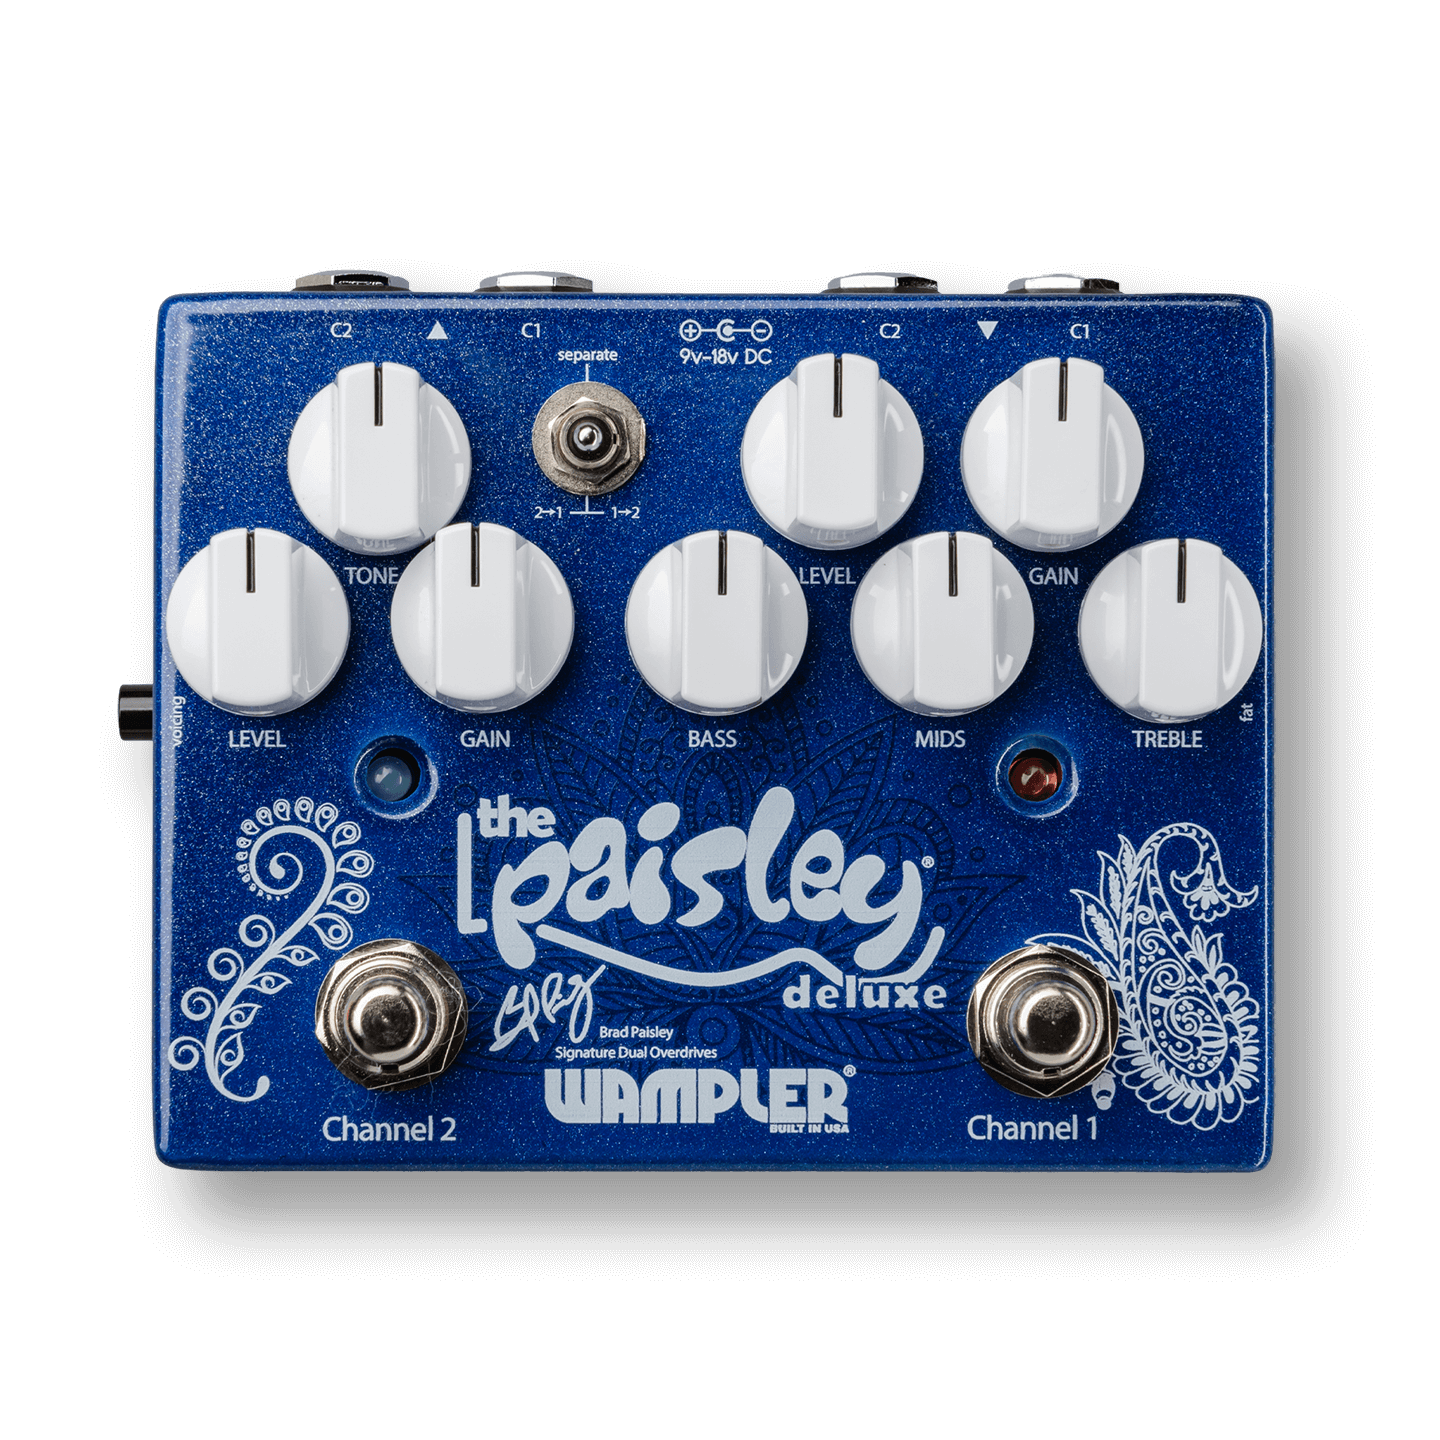 Brad Paisley: Paisley Deluxe Guitar Pedal